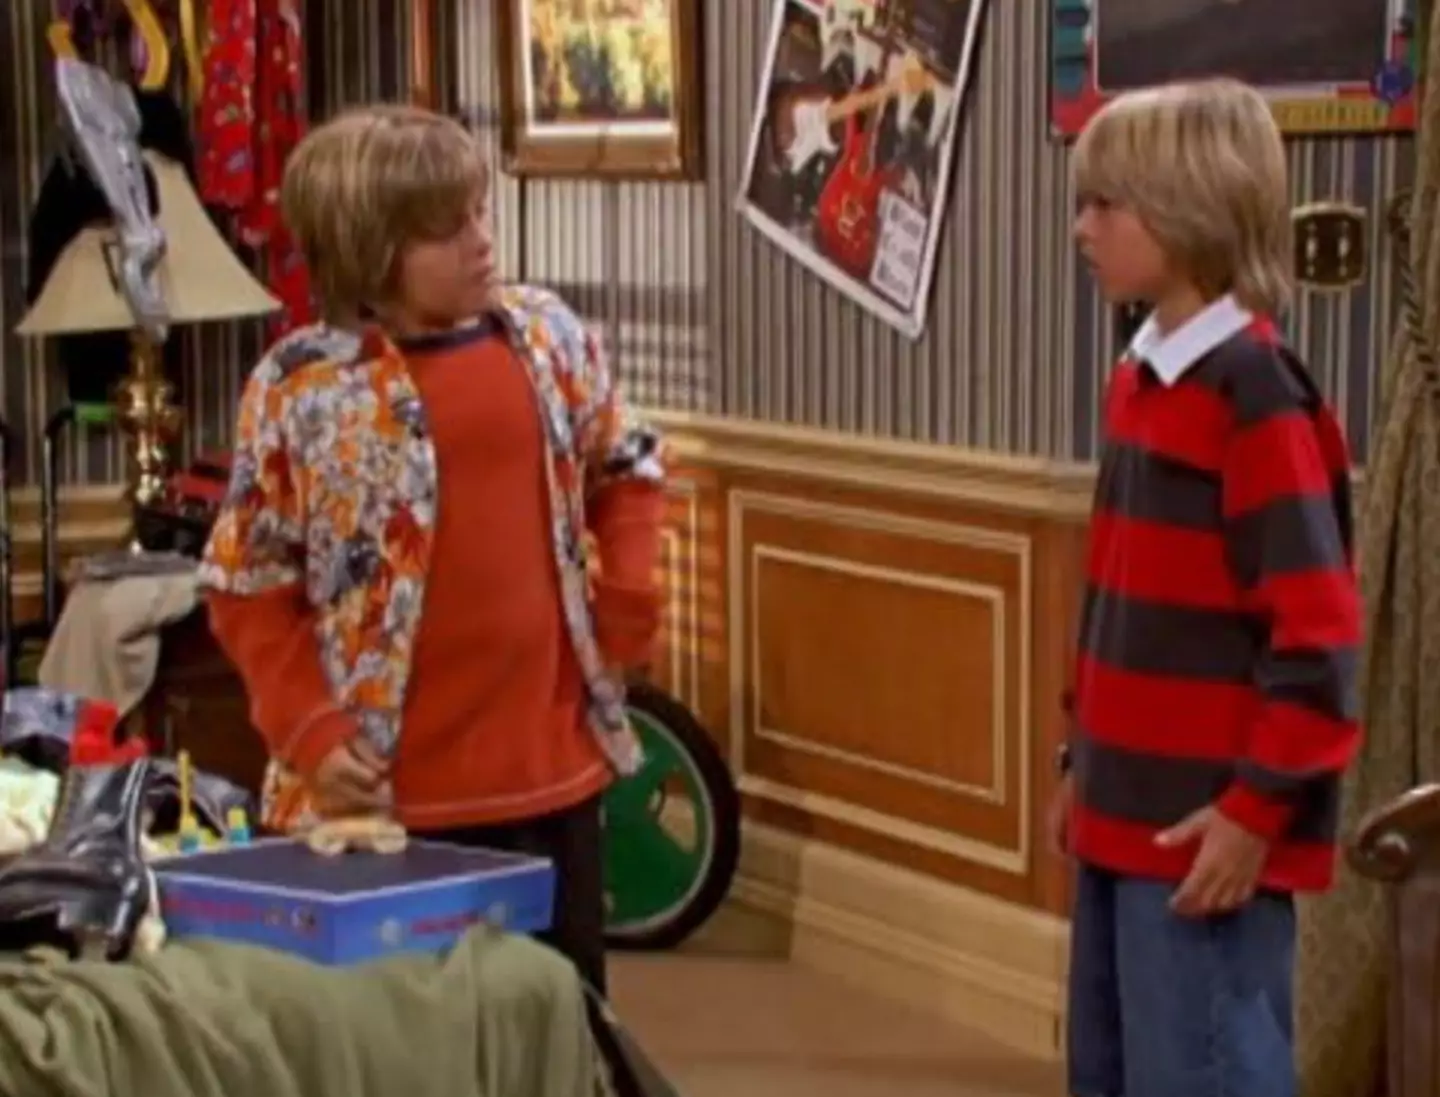 The alleged incident happened while filming The Suite Life of Zack and Cody.